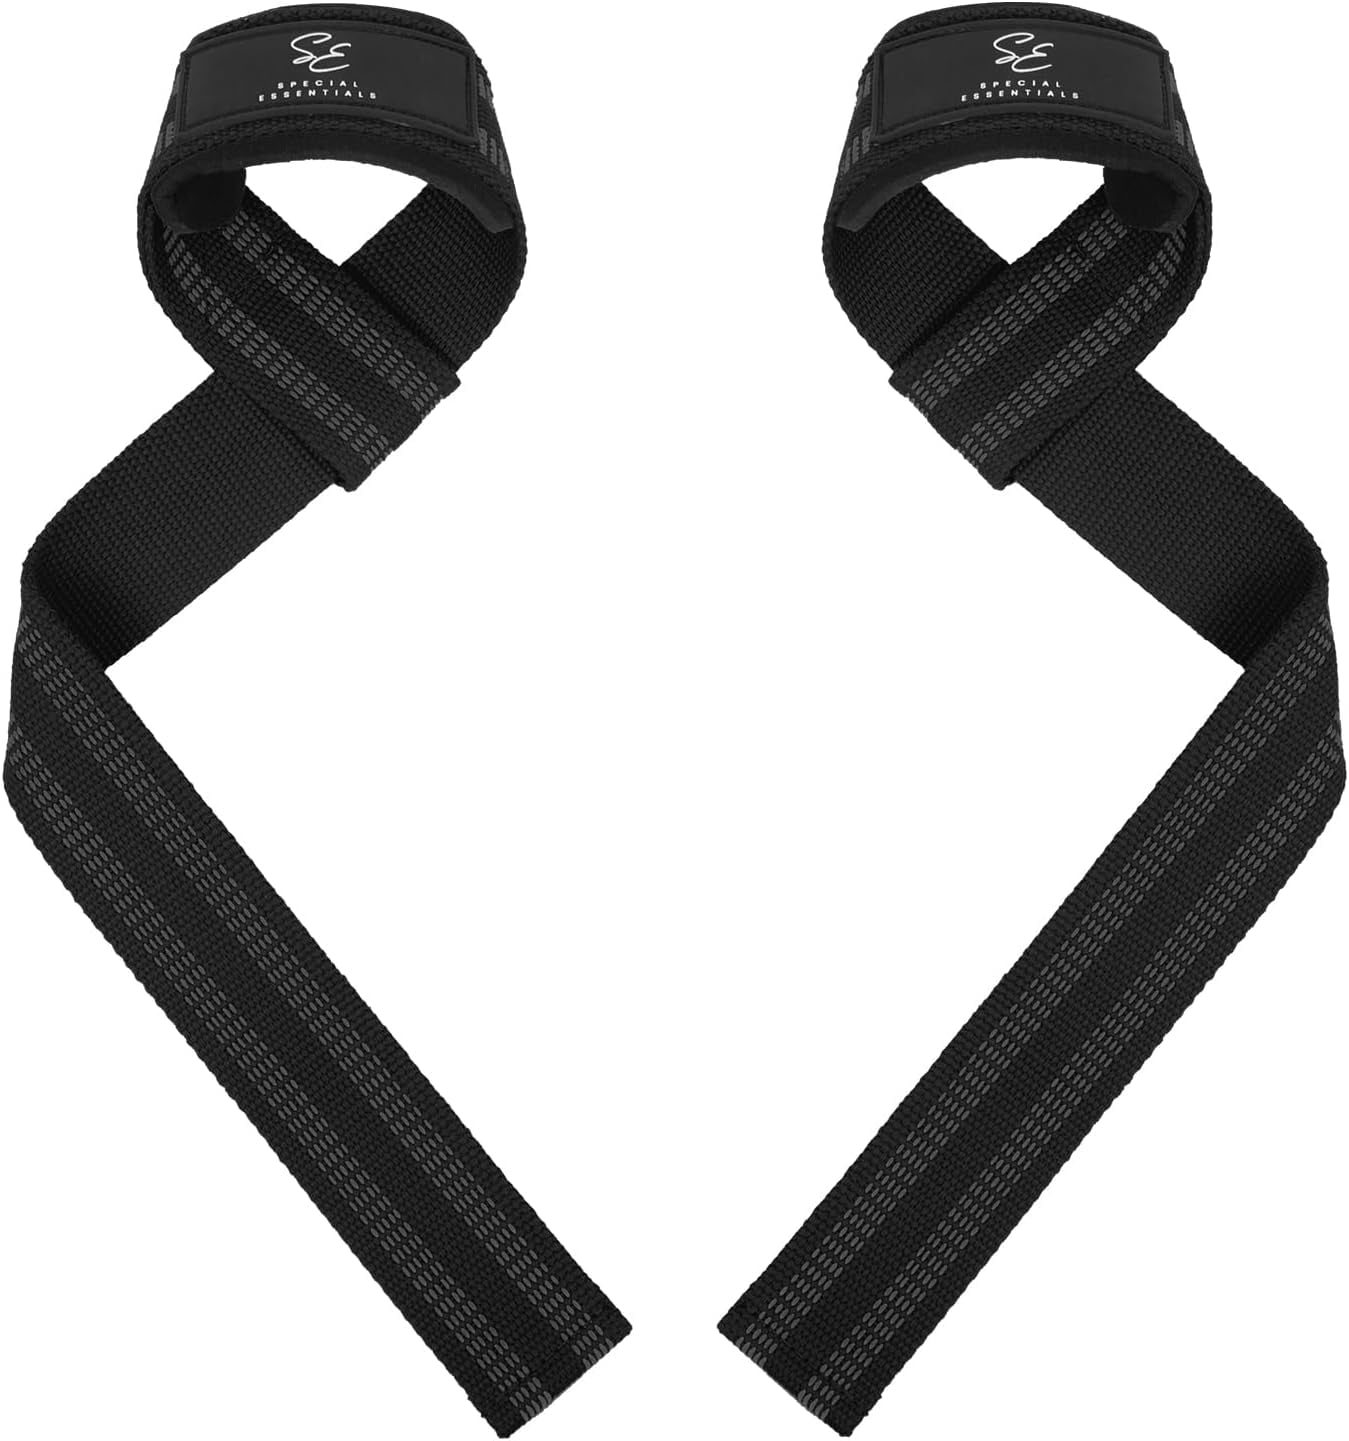 Weightlifting Hooks Made of Iron w/ Wrist Straps, Blue - Estremo Fitness